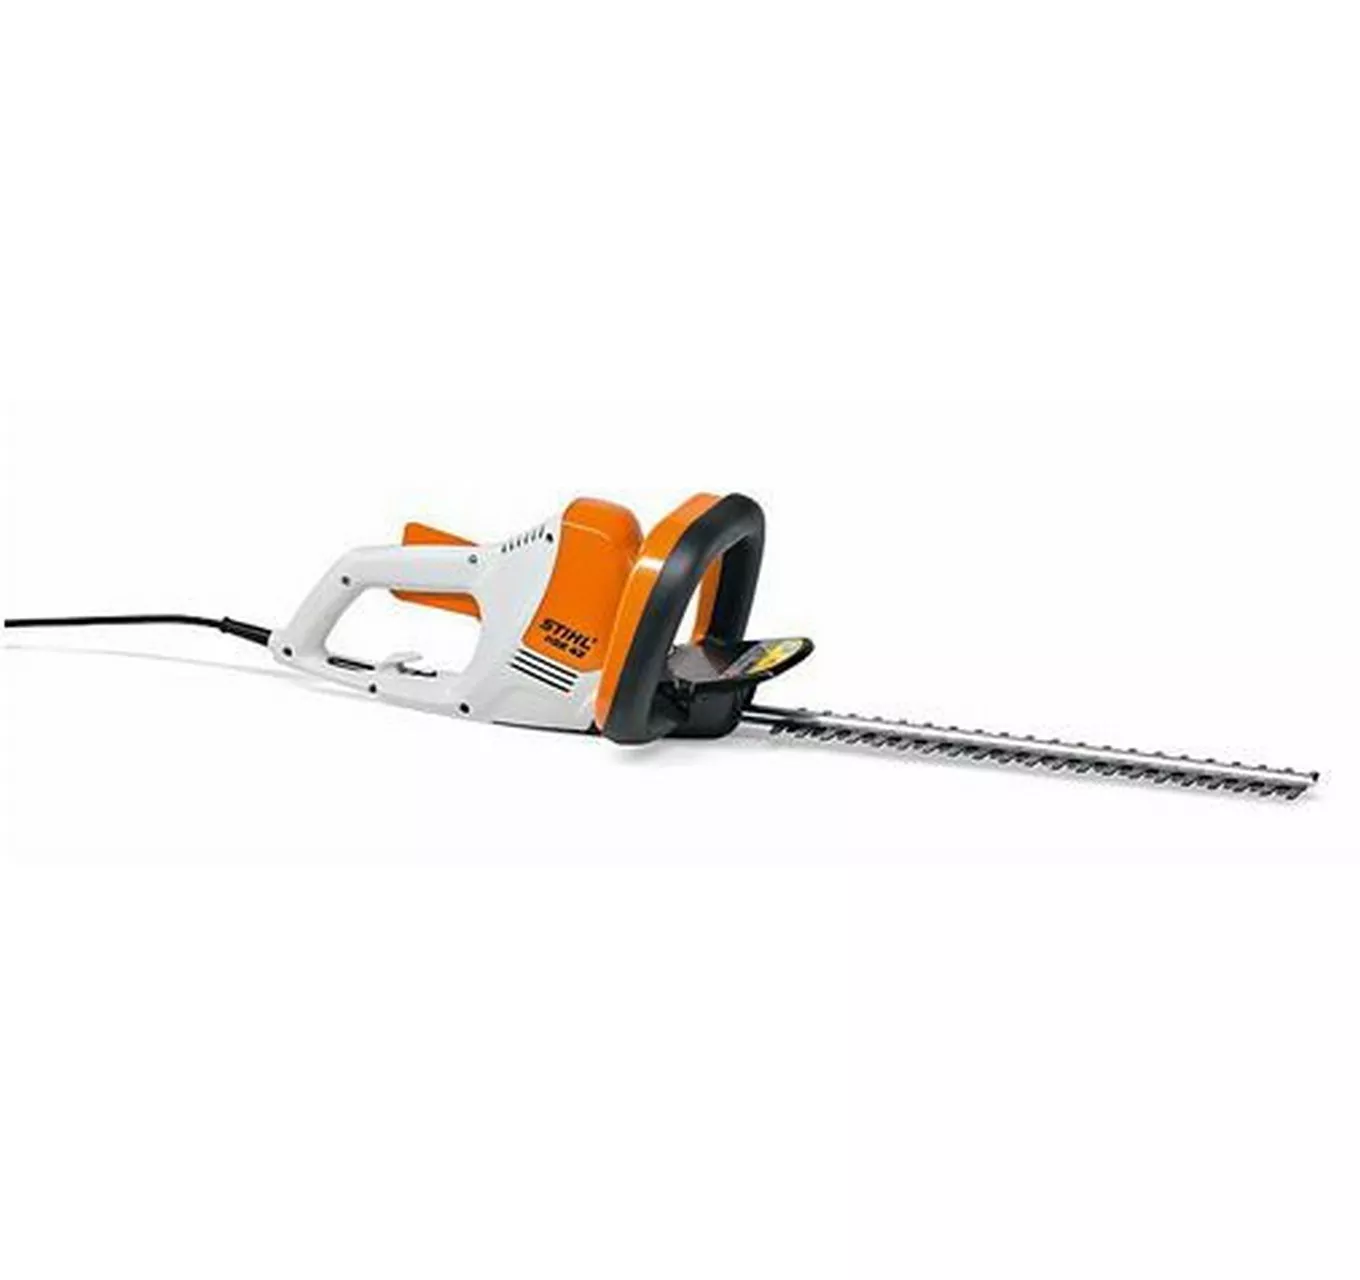 HSE 42 Hedge Trimmer 18"